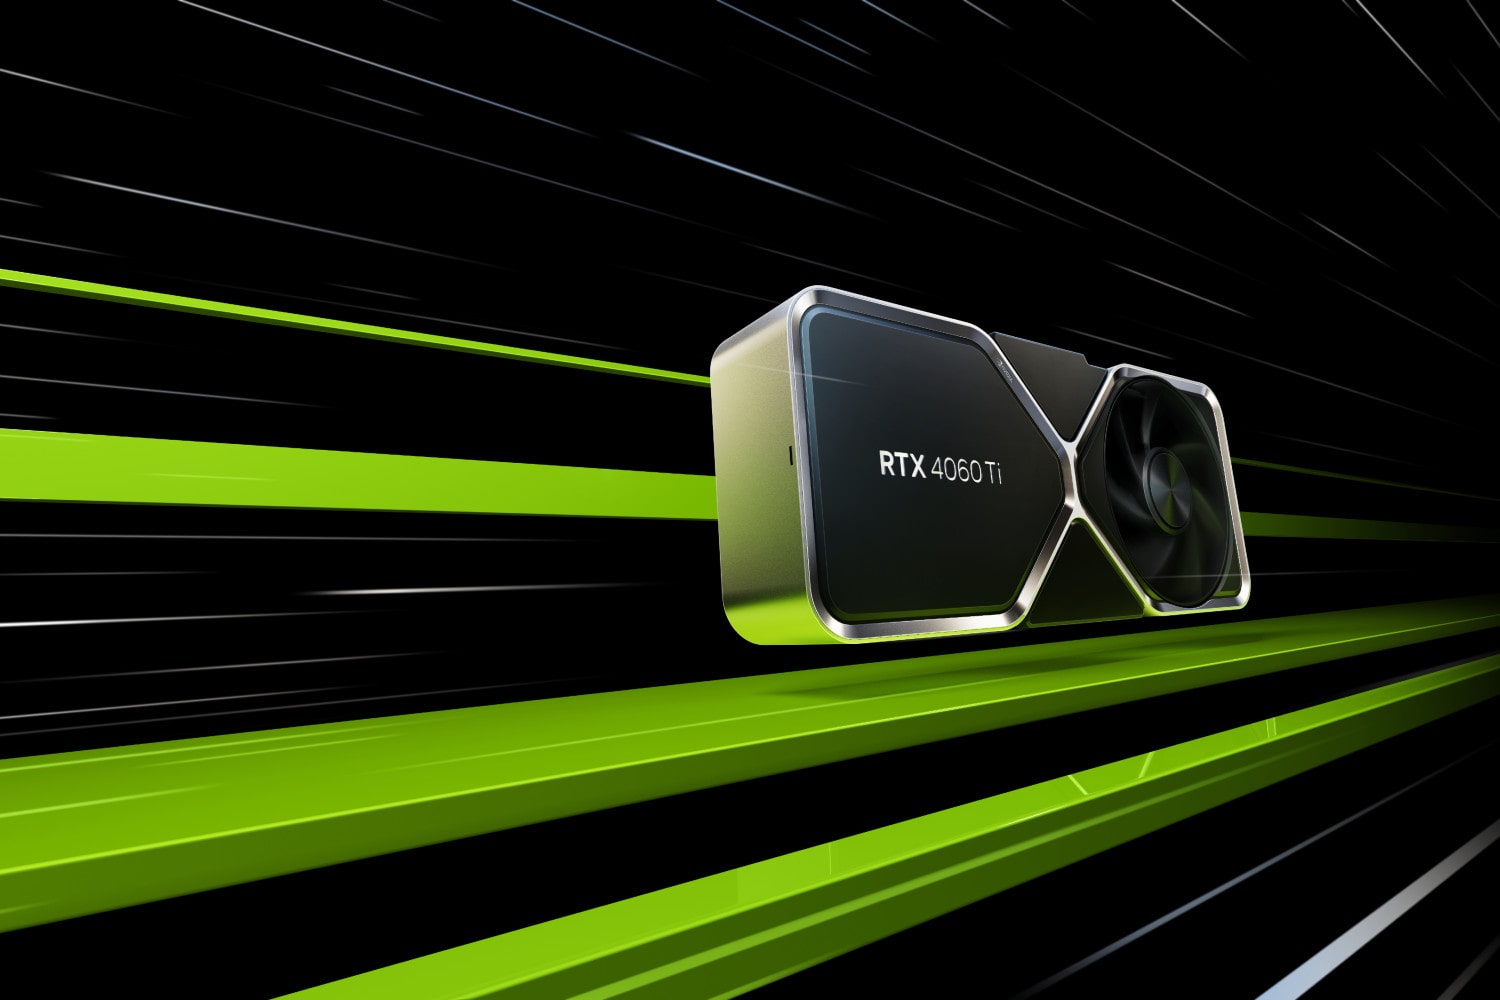 Nvidia's RTX 4060 Ti graphics card against a black and green background.